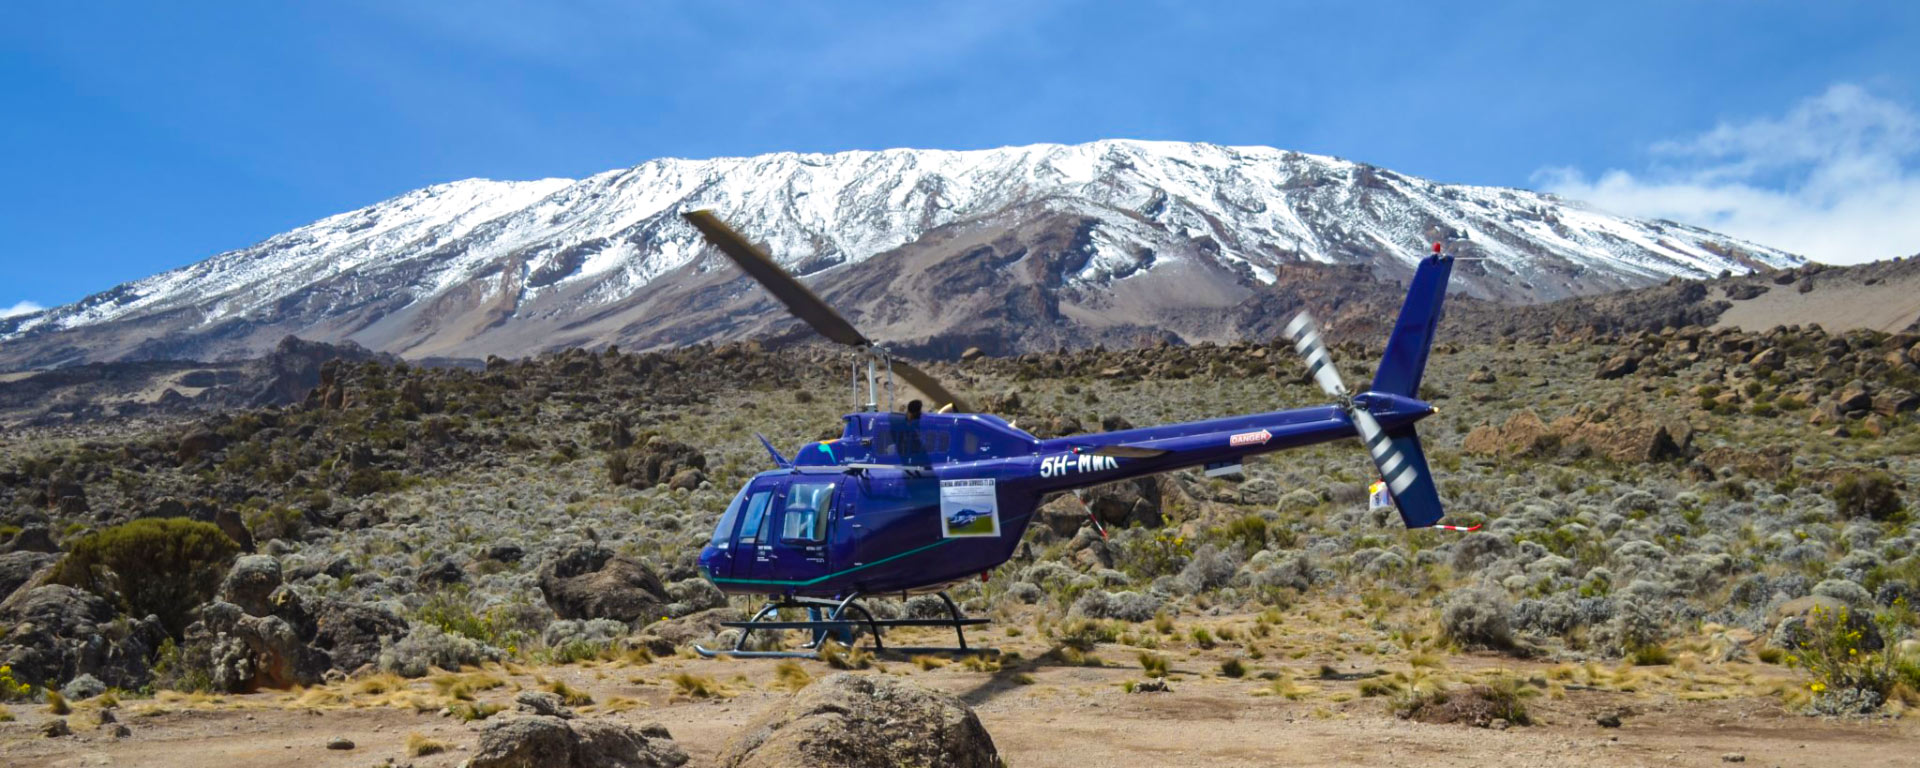 Kilimanjaro Scenic Flight by Helicopter